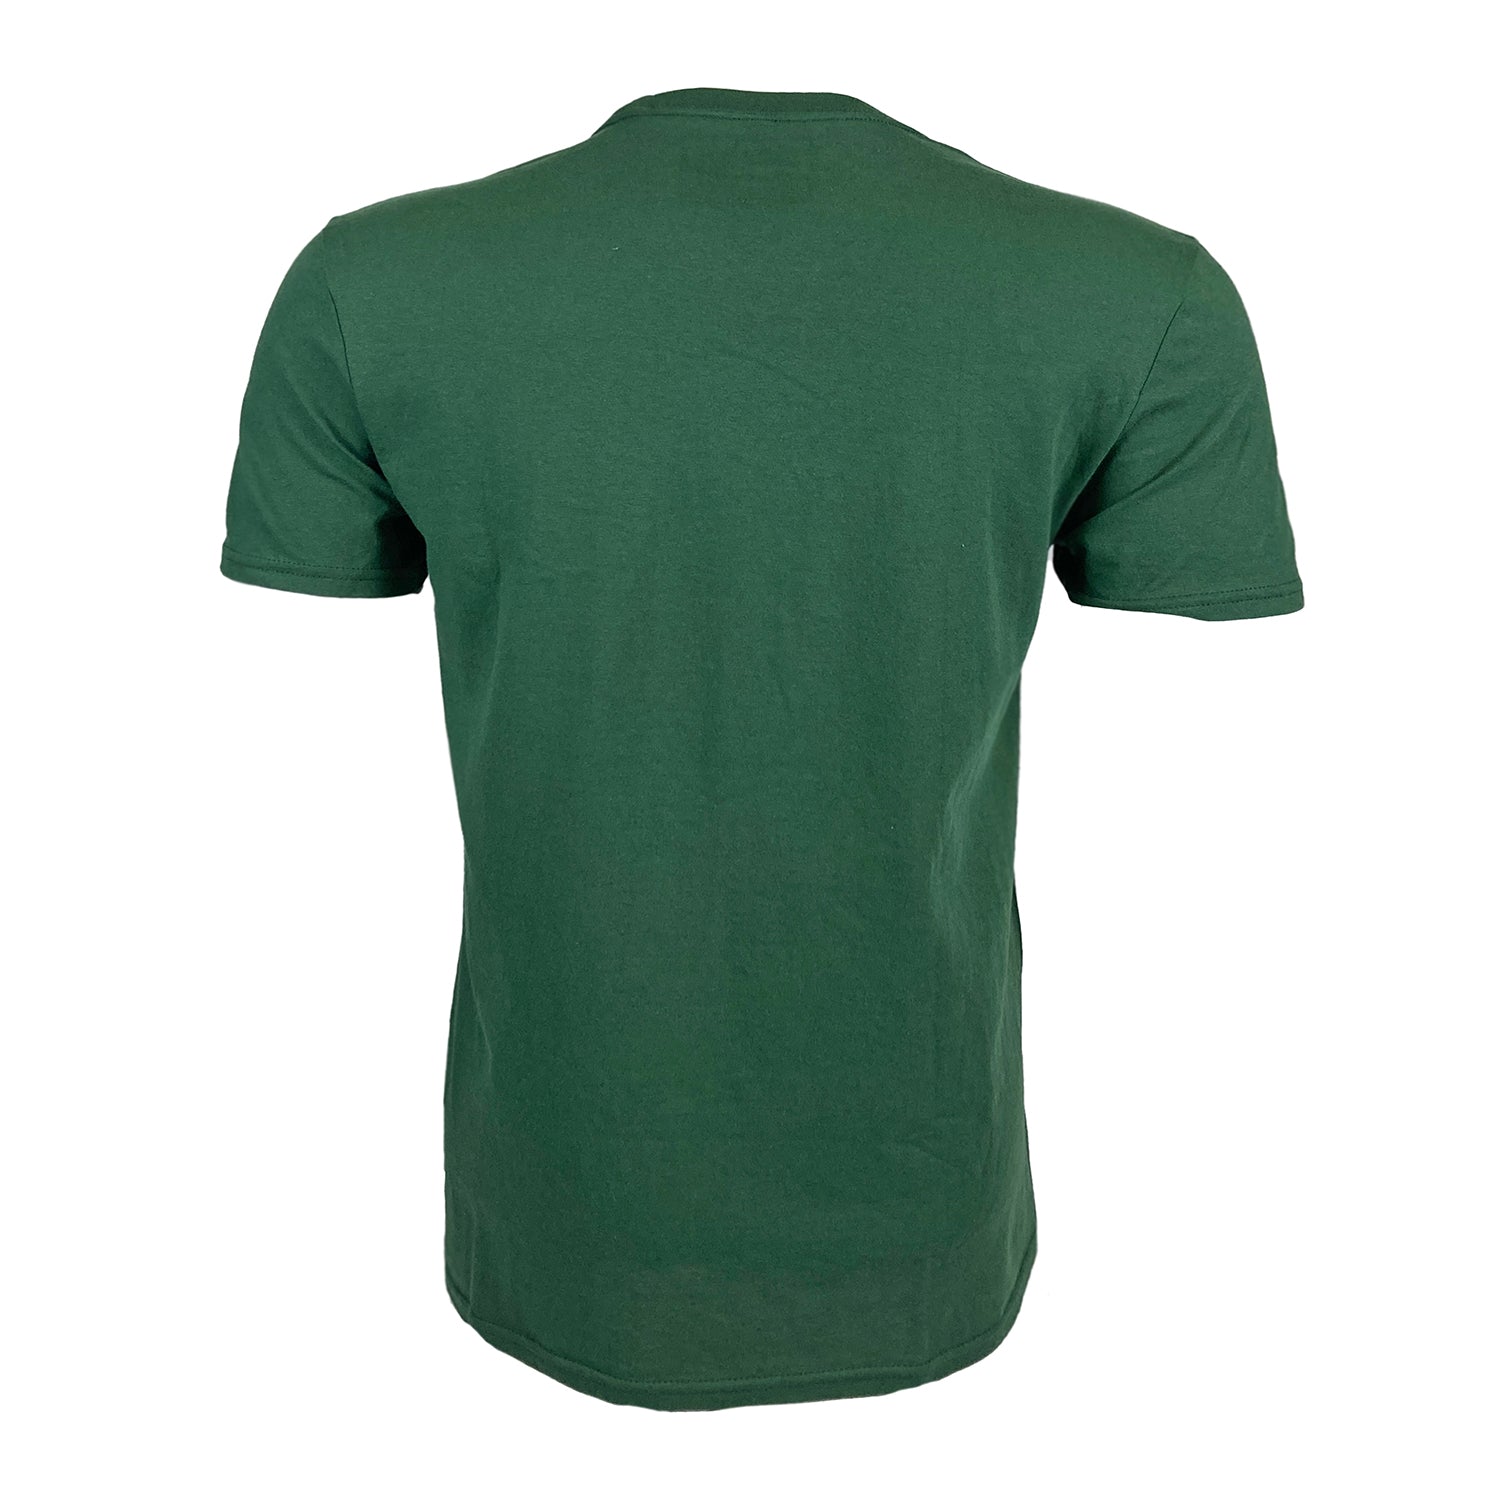 Green tee shown from the rear.